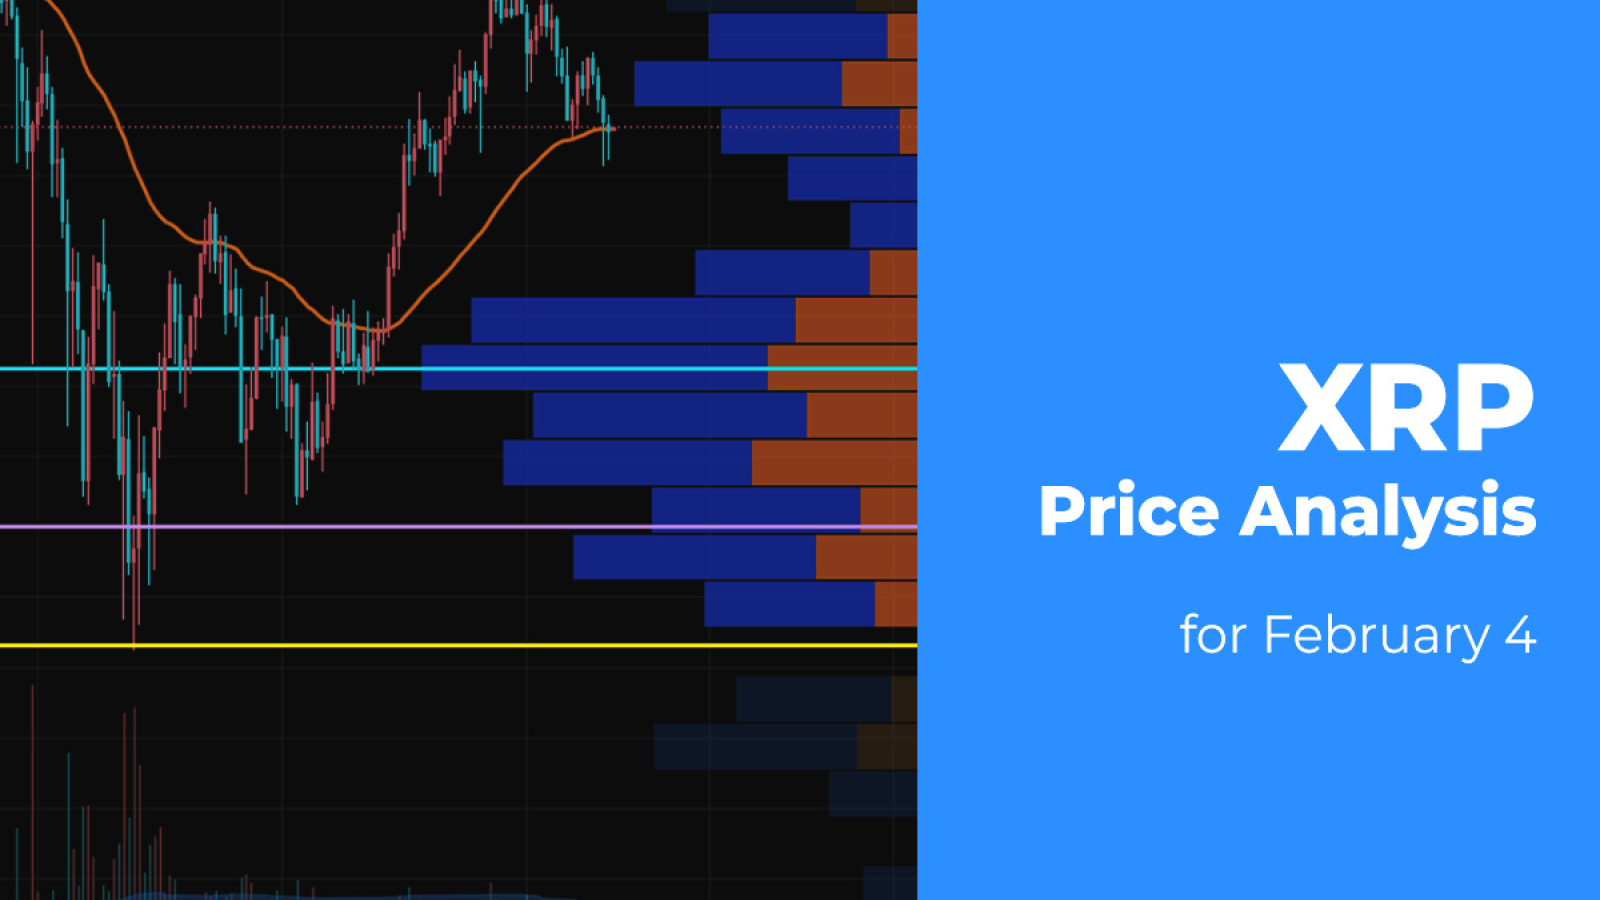 Xrp Price Analysis For February 4